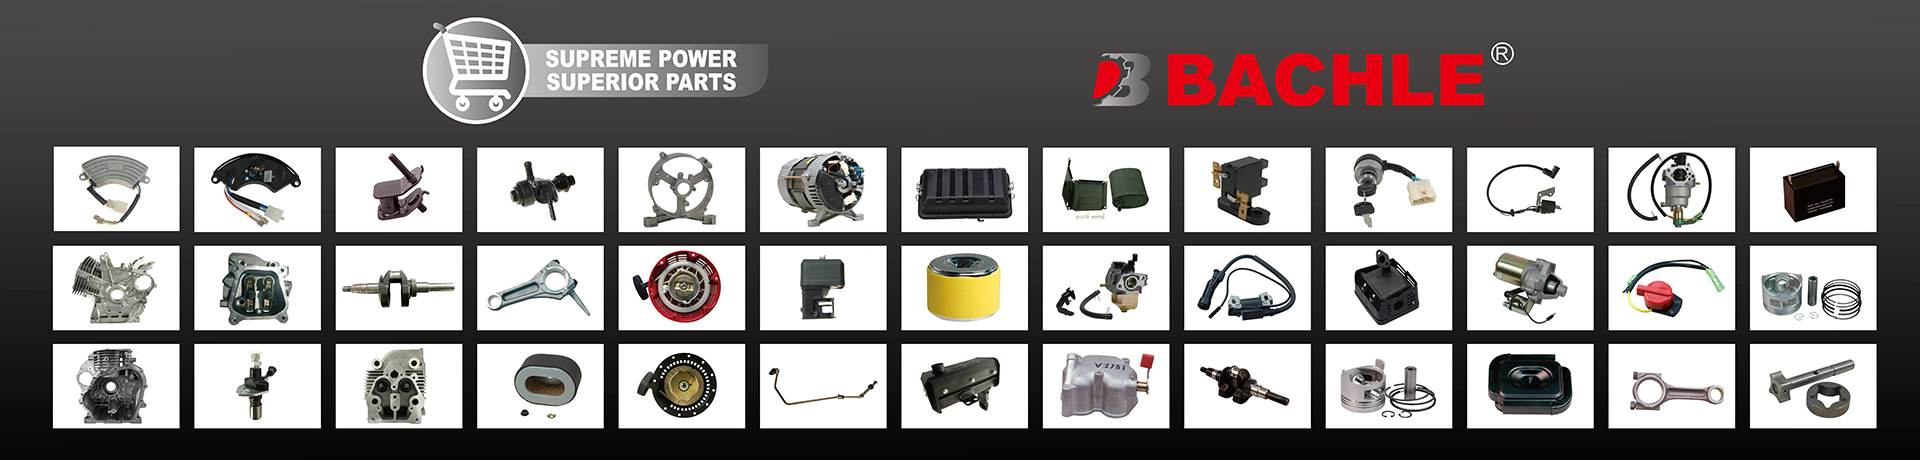 Power Tools And Accessories